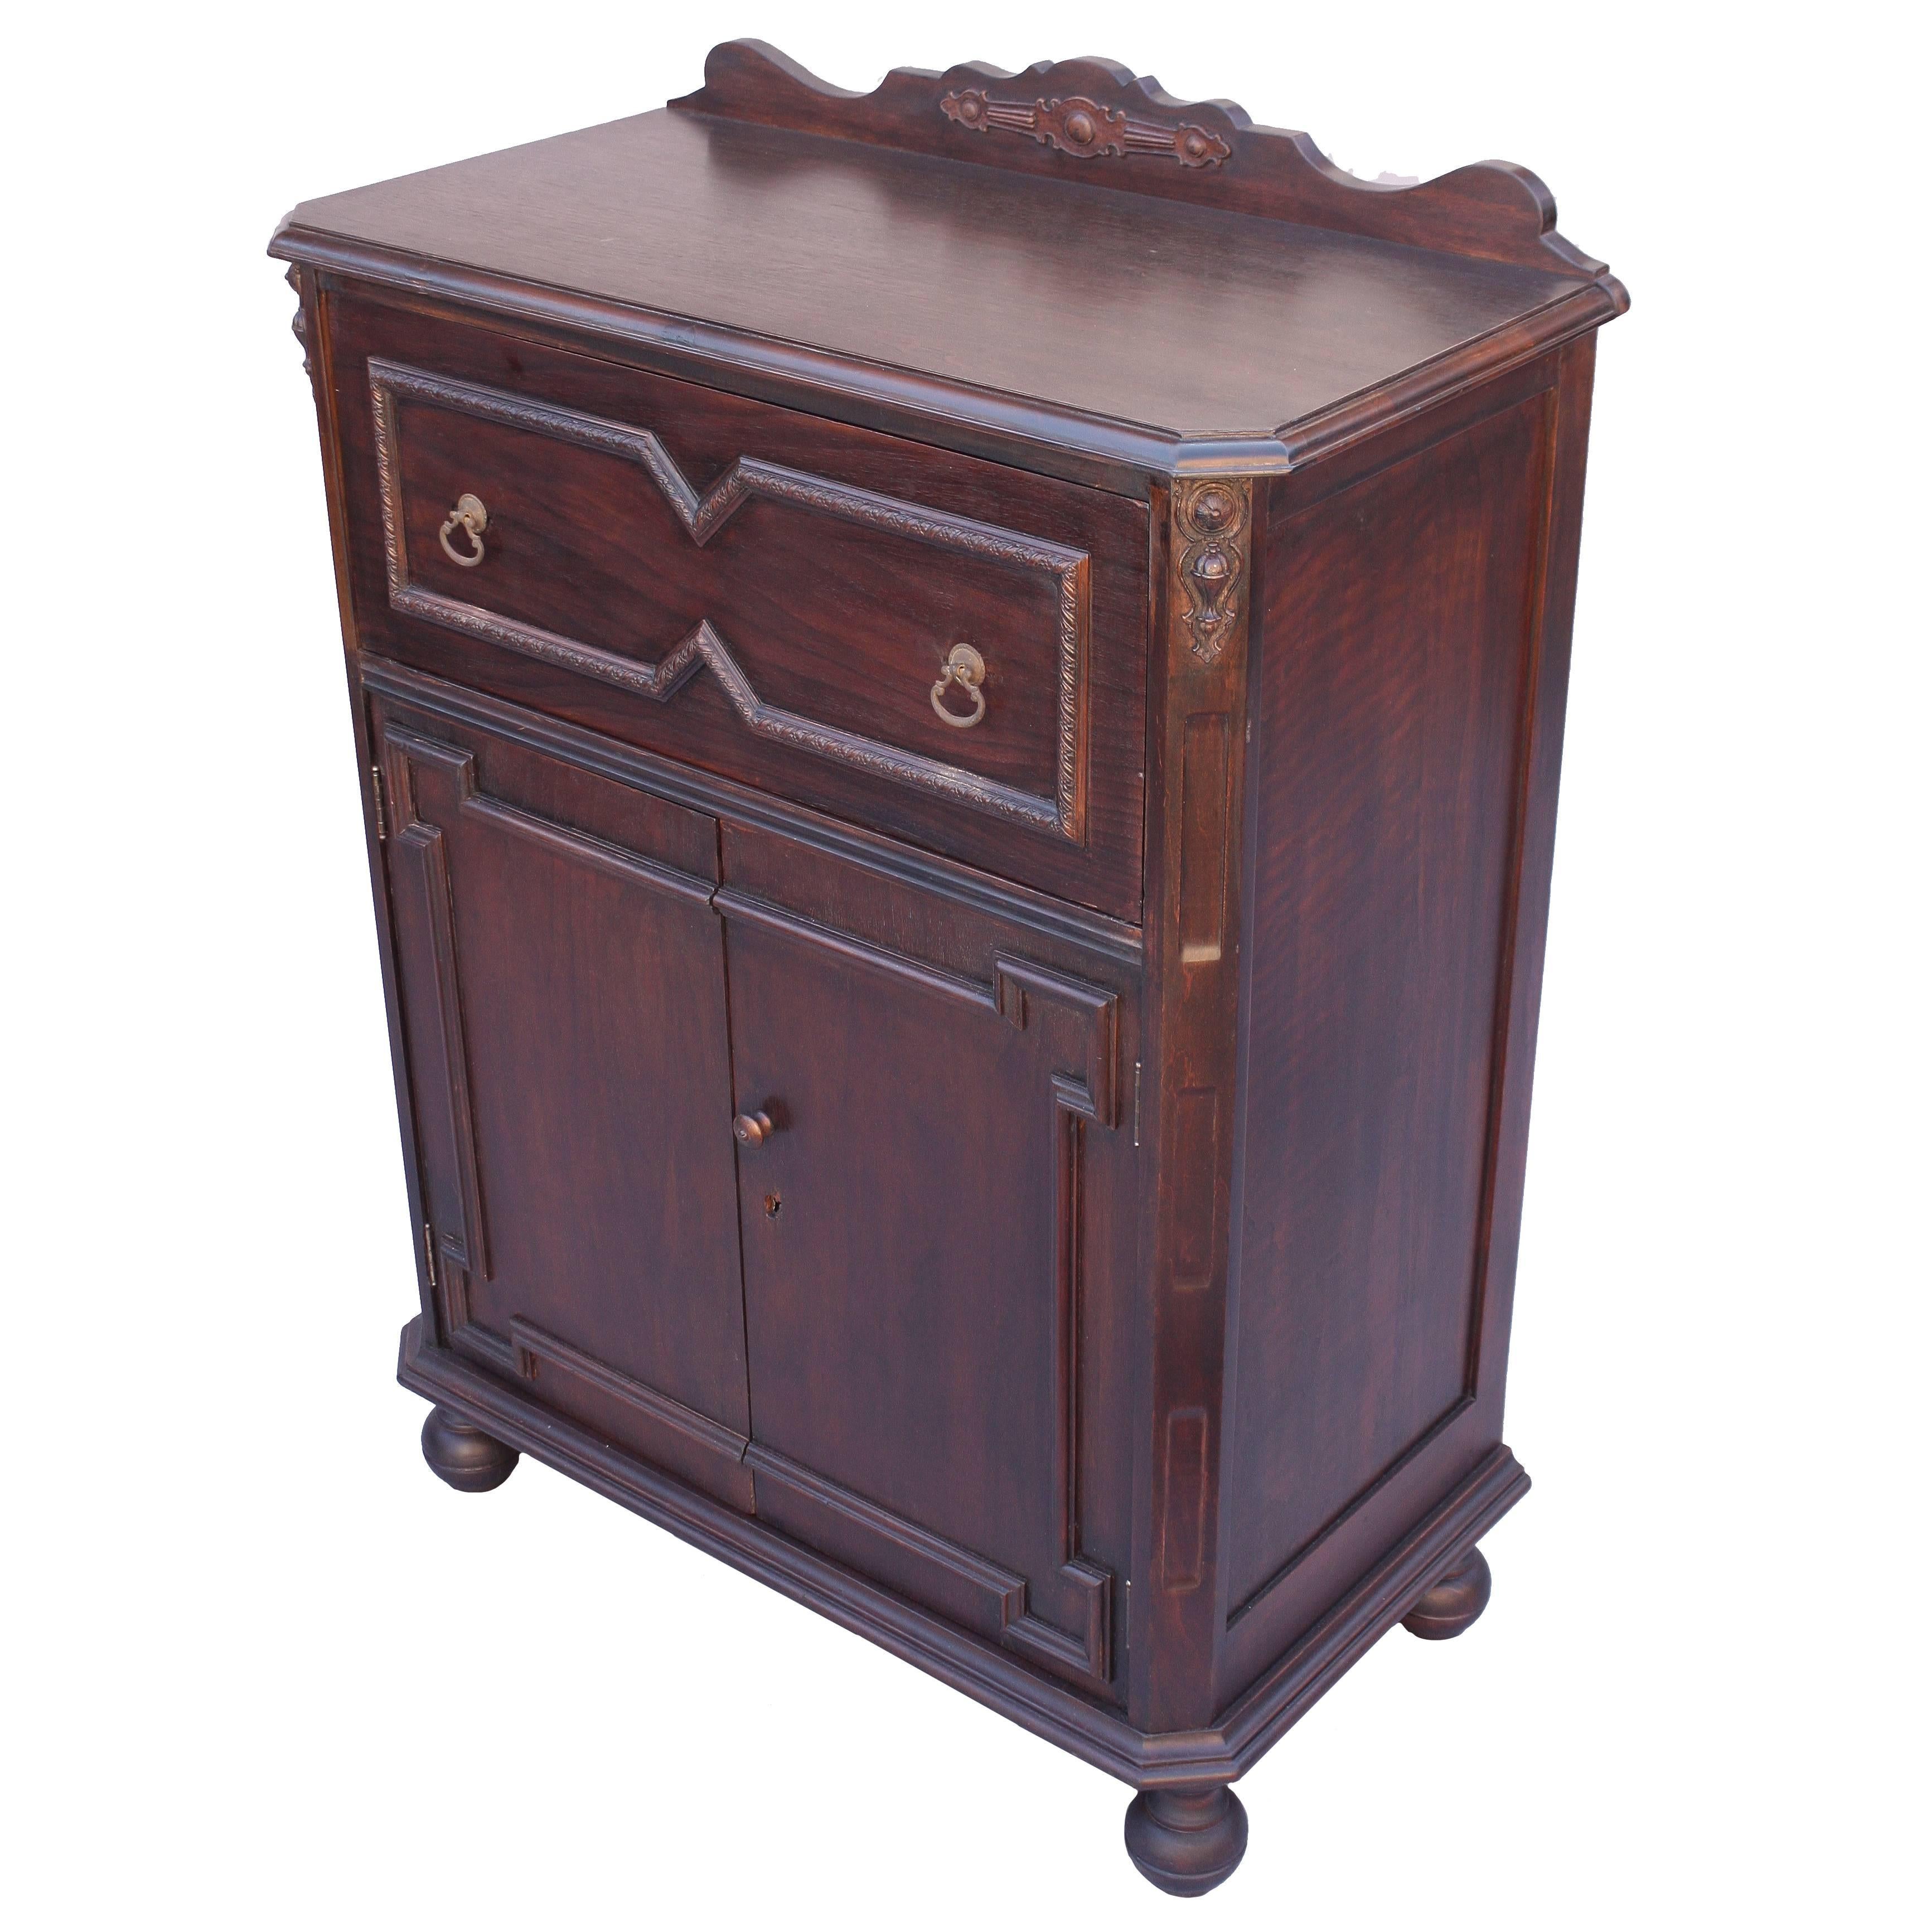 1920s Angeles Furniture Company Writing Desk or Cabinet